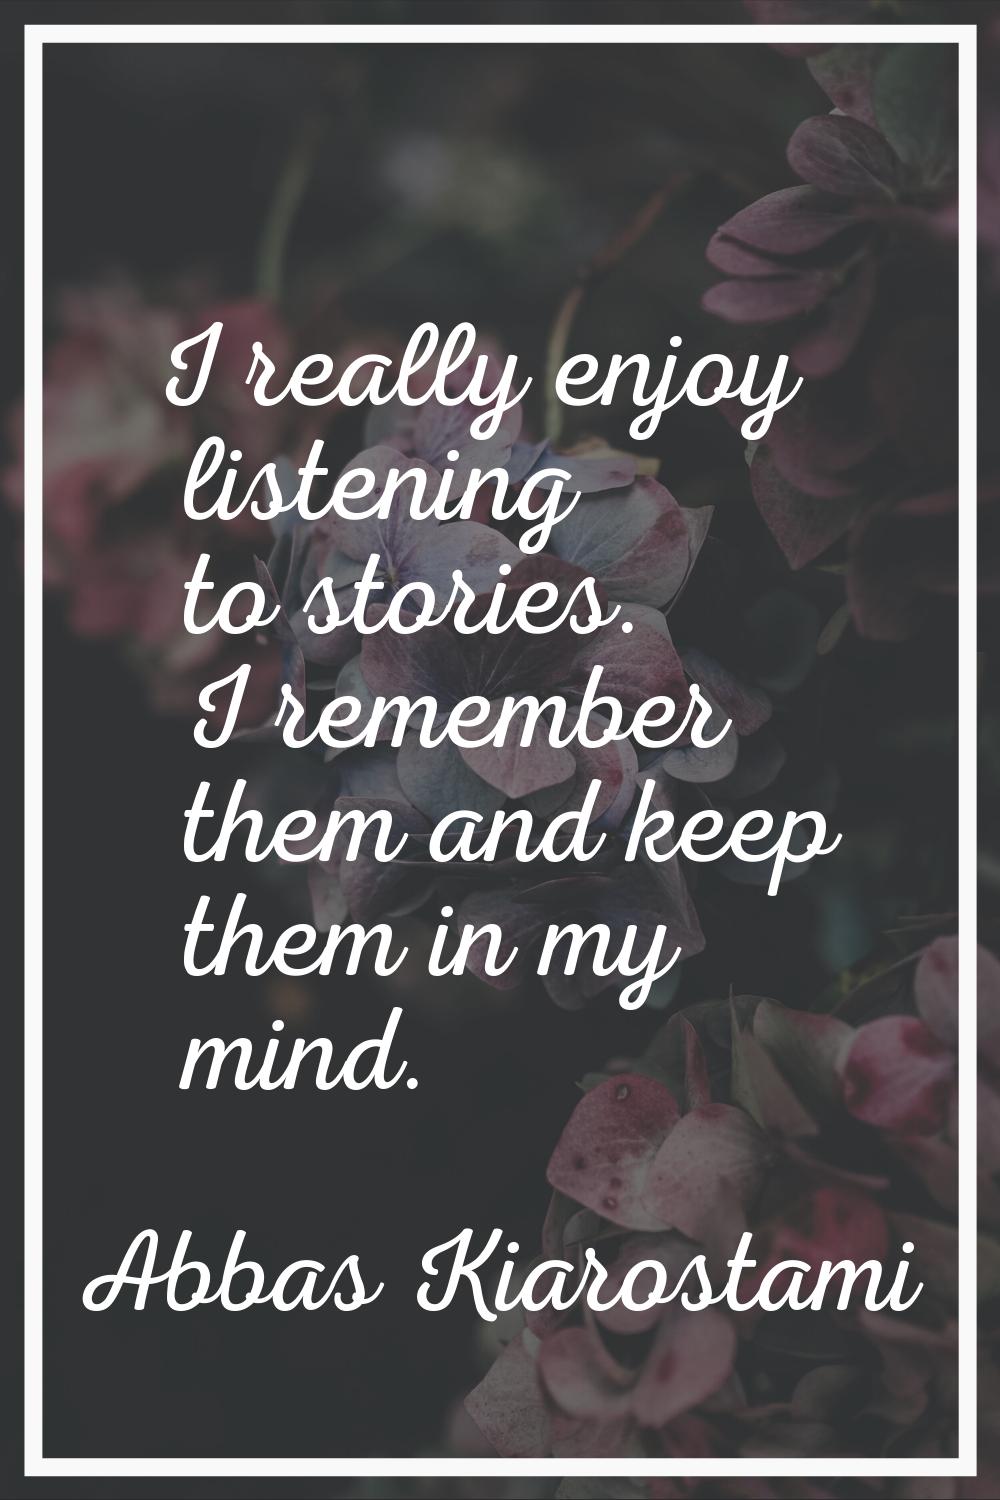 I really enjoy listening to stories. I remember them and keep them in my mind.